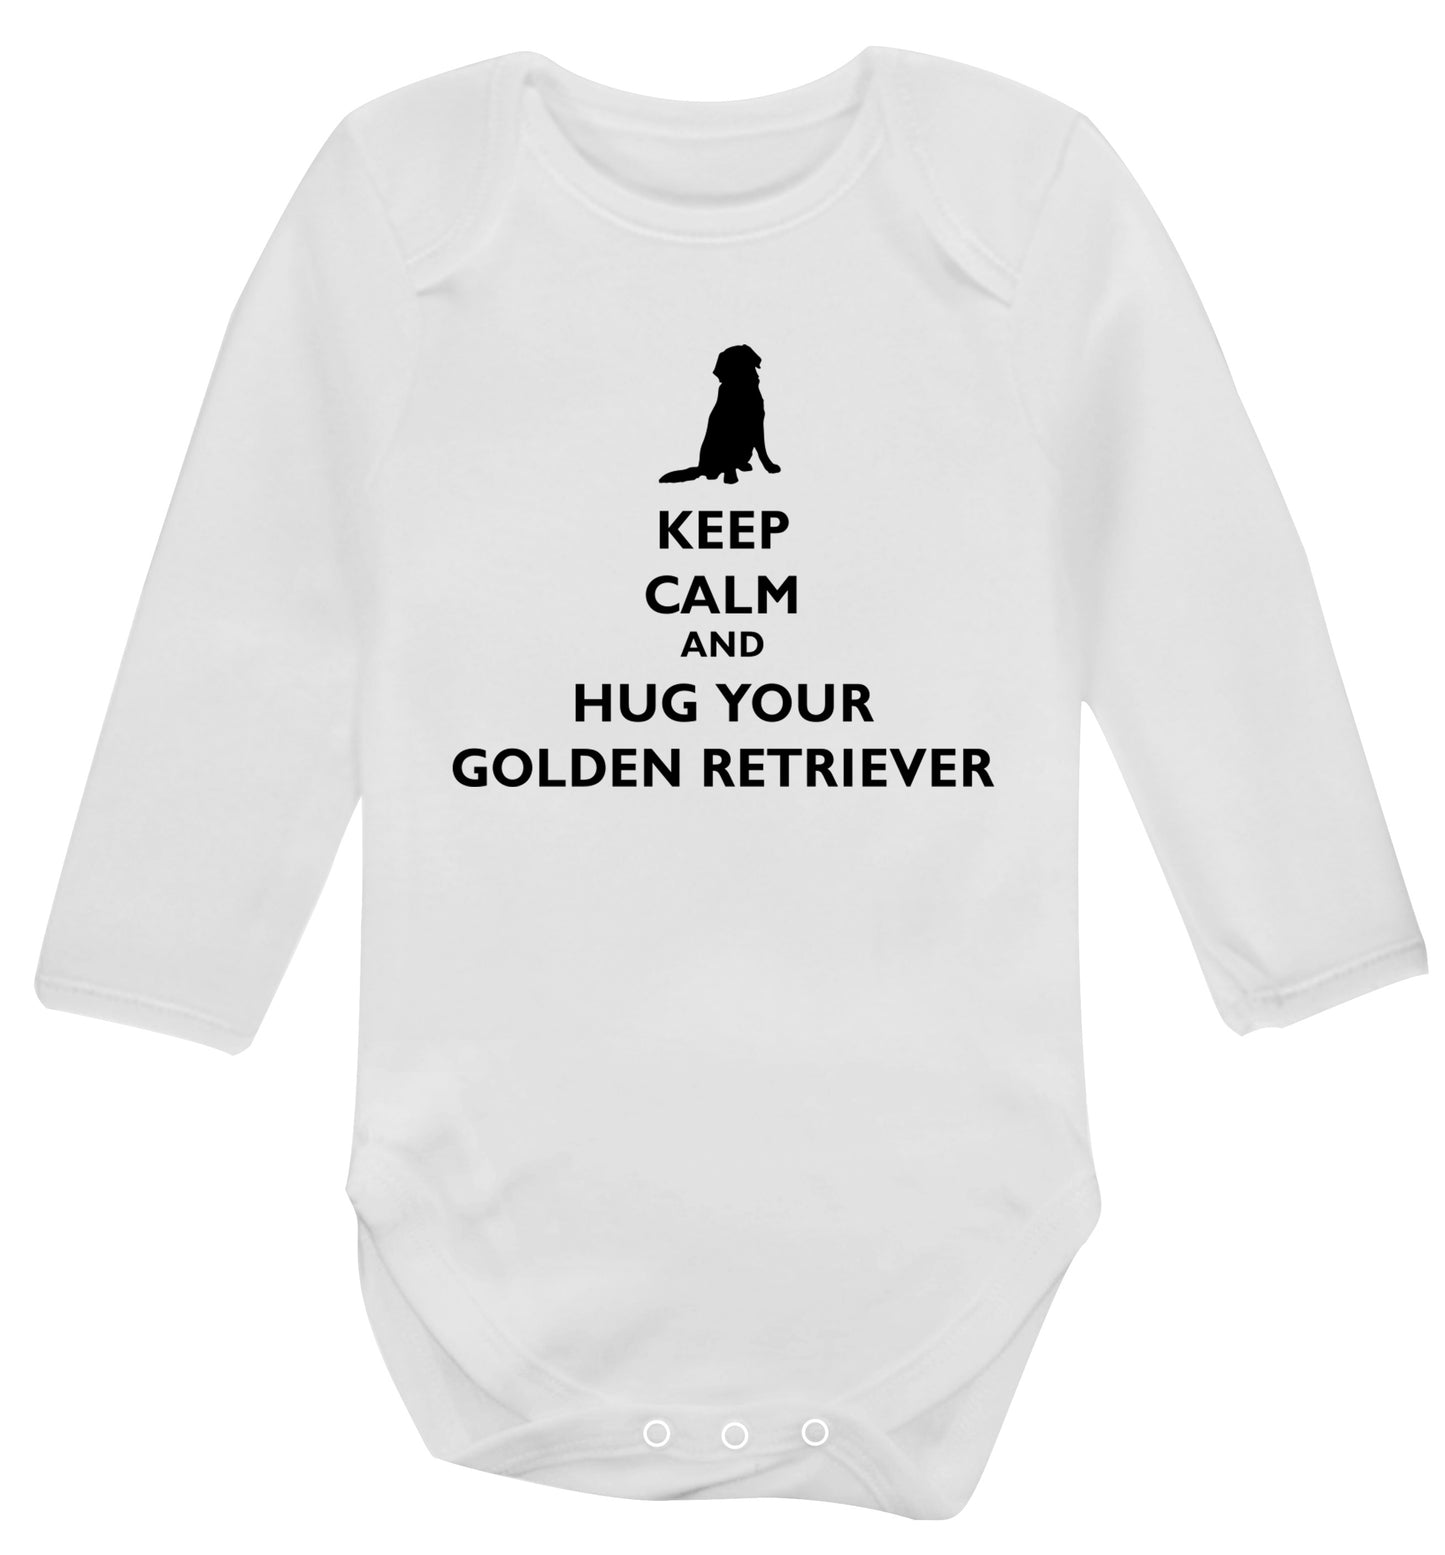 Keep calm and hug your golden retriever Baby Vest long sleeved white 6-12 months